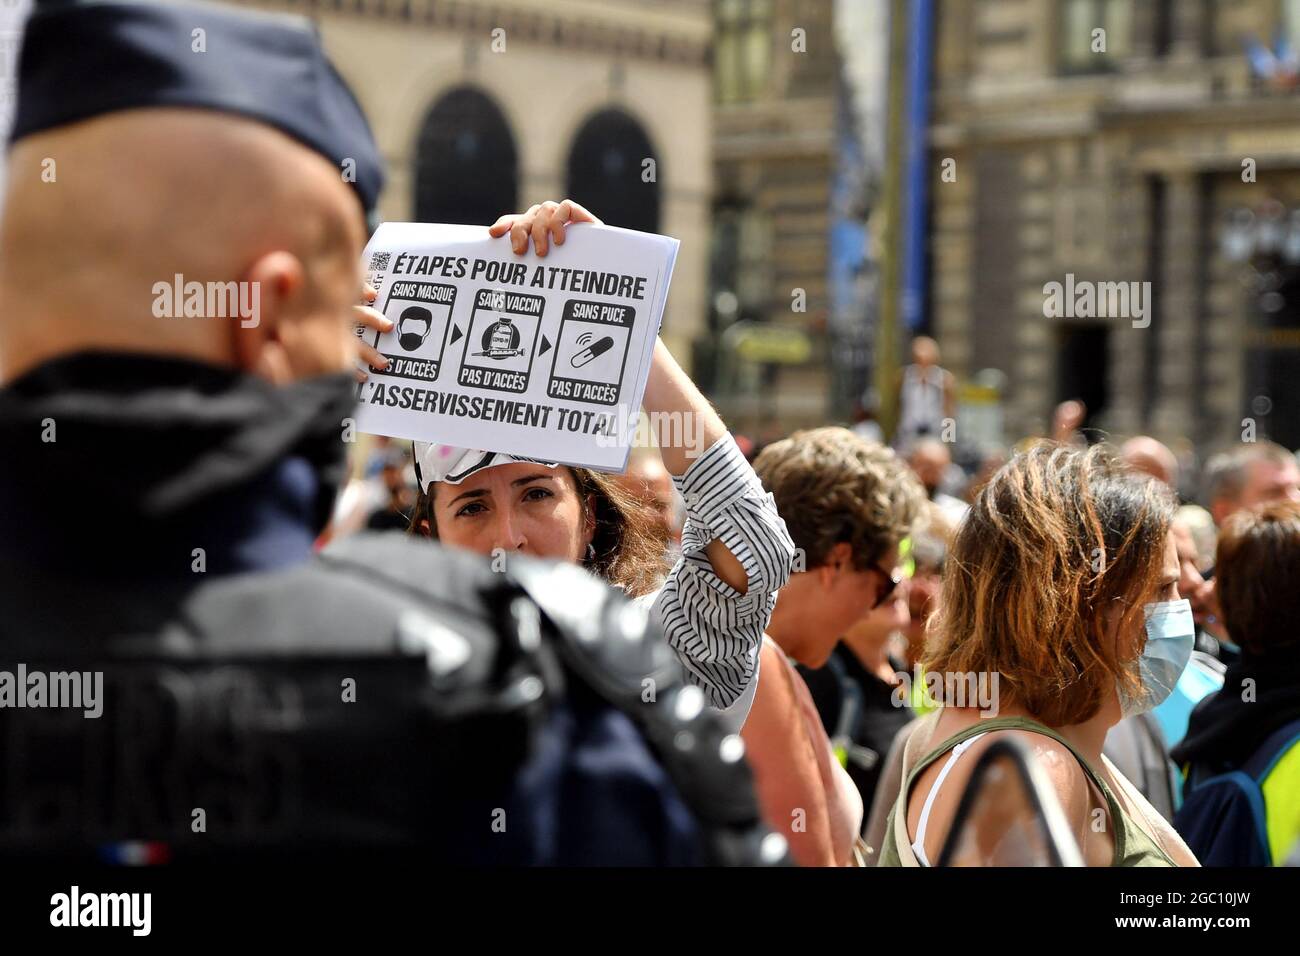 People gather to demonstrate against the French Health Pass outside the French Constitutional Council as it deliberates on the new law requiring compulsory vaccination for some professions and proof of vaccination or negative Covid-19 test to access some public spaces. Paris, France on August 5, 2021. Photo by Karim Ait Adjedjou/Avenir Pictures/ABACAPRESS.COM Stock Photo